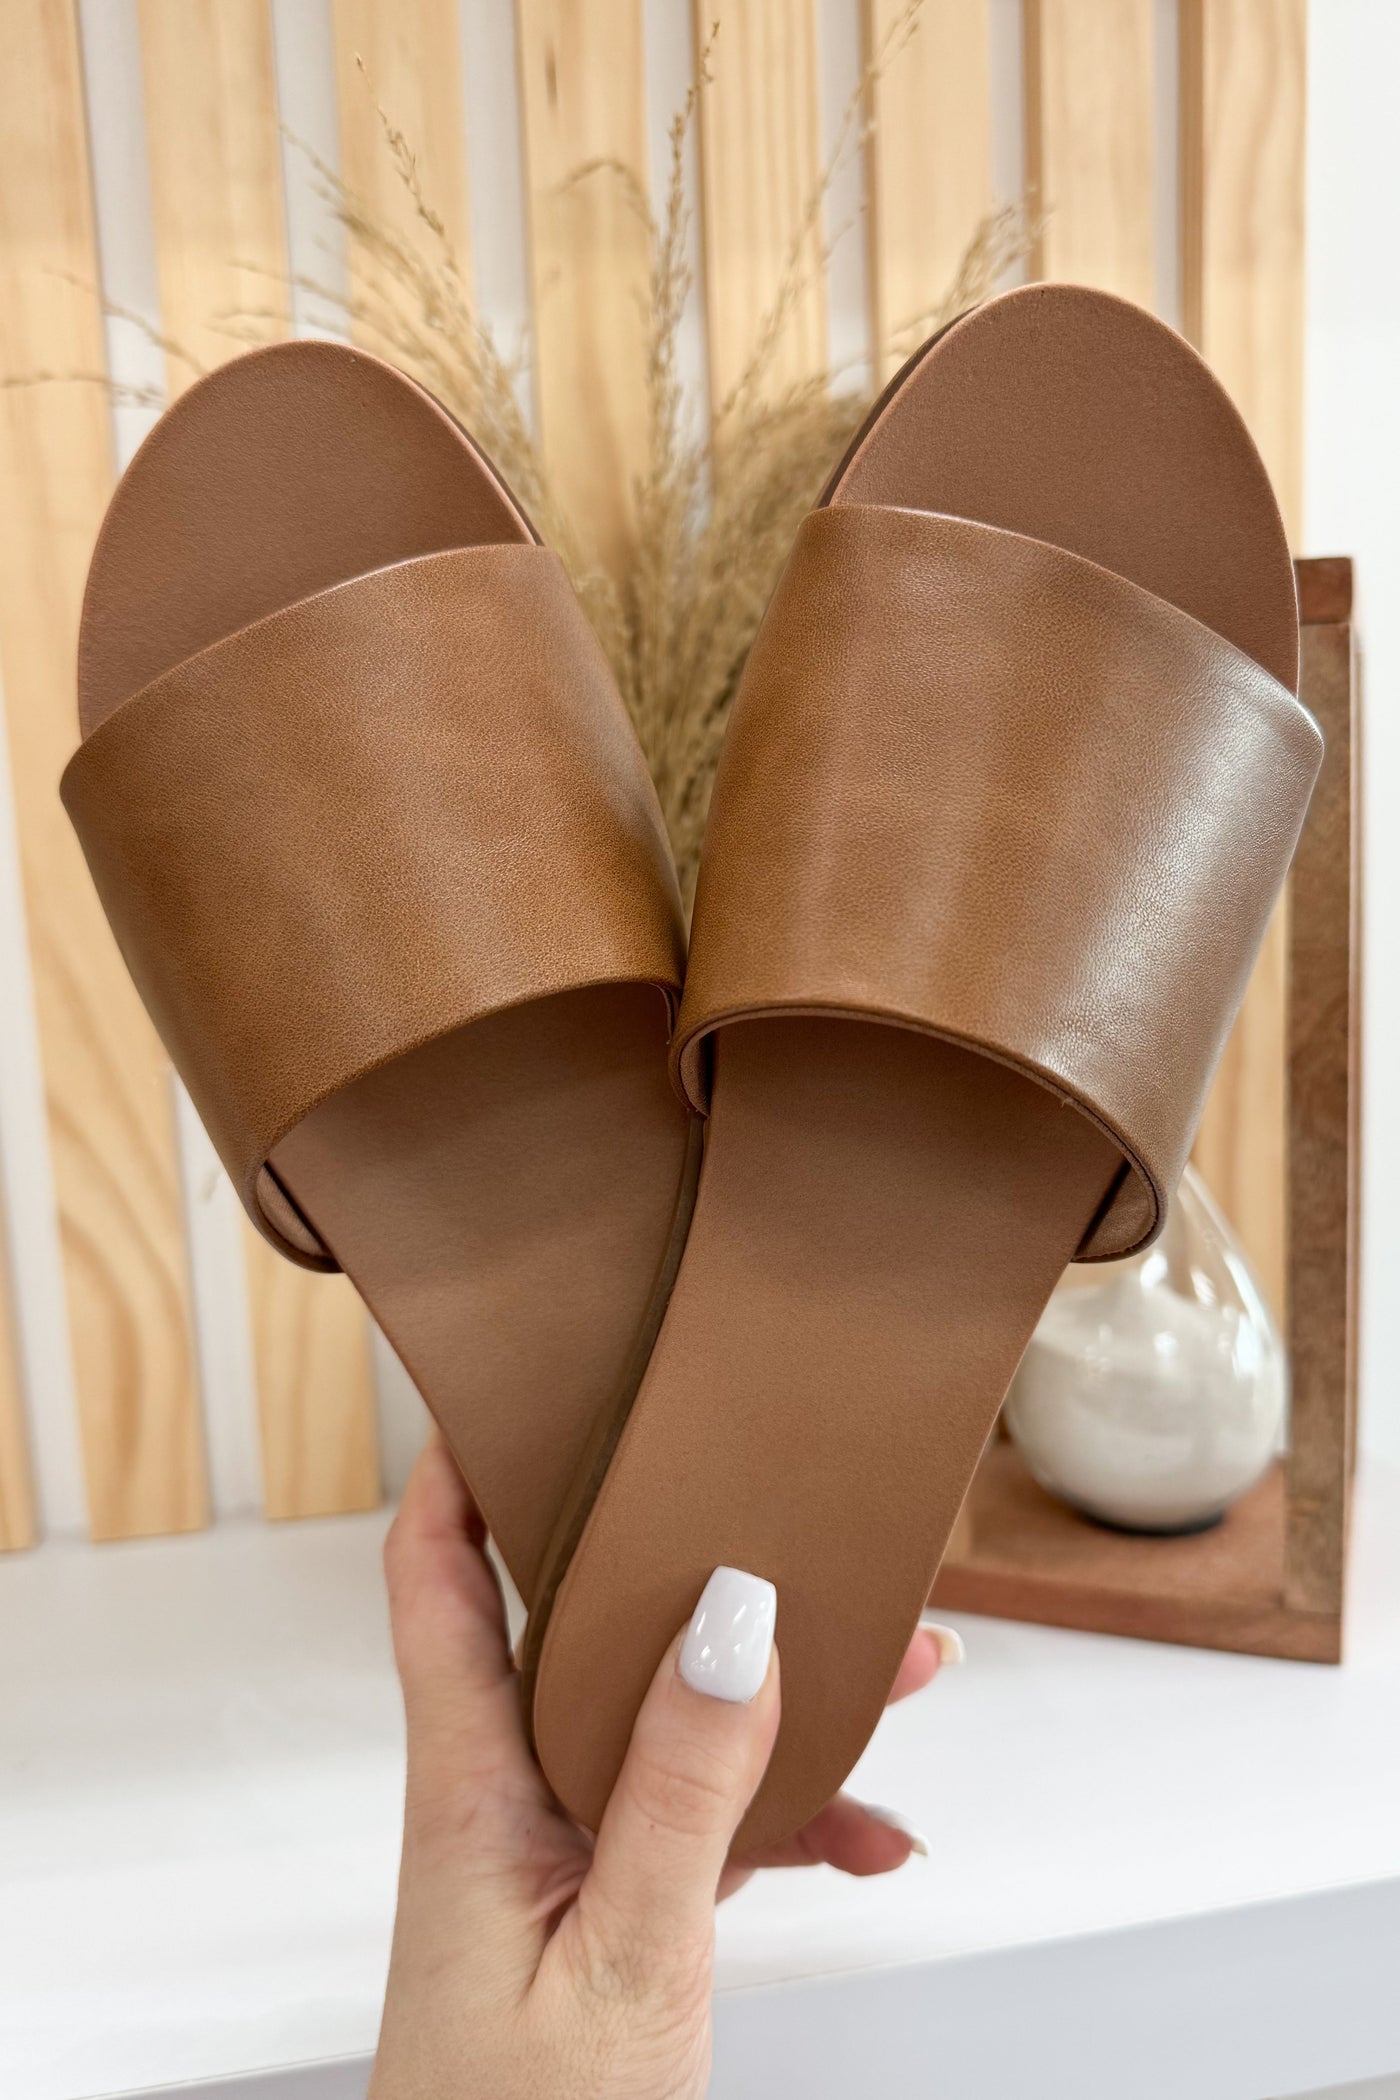 Jenna Sandals (Tan) - Happily Ever Aften